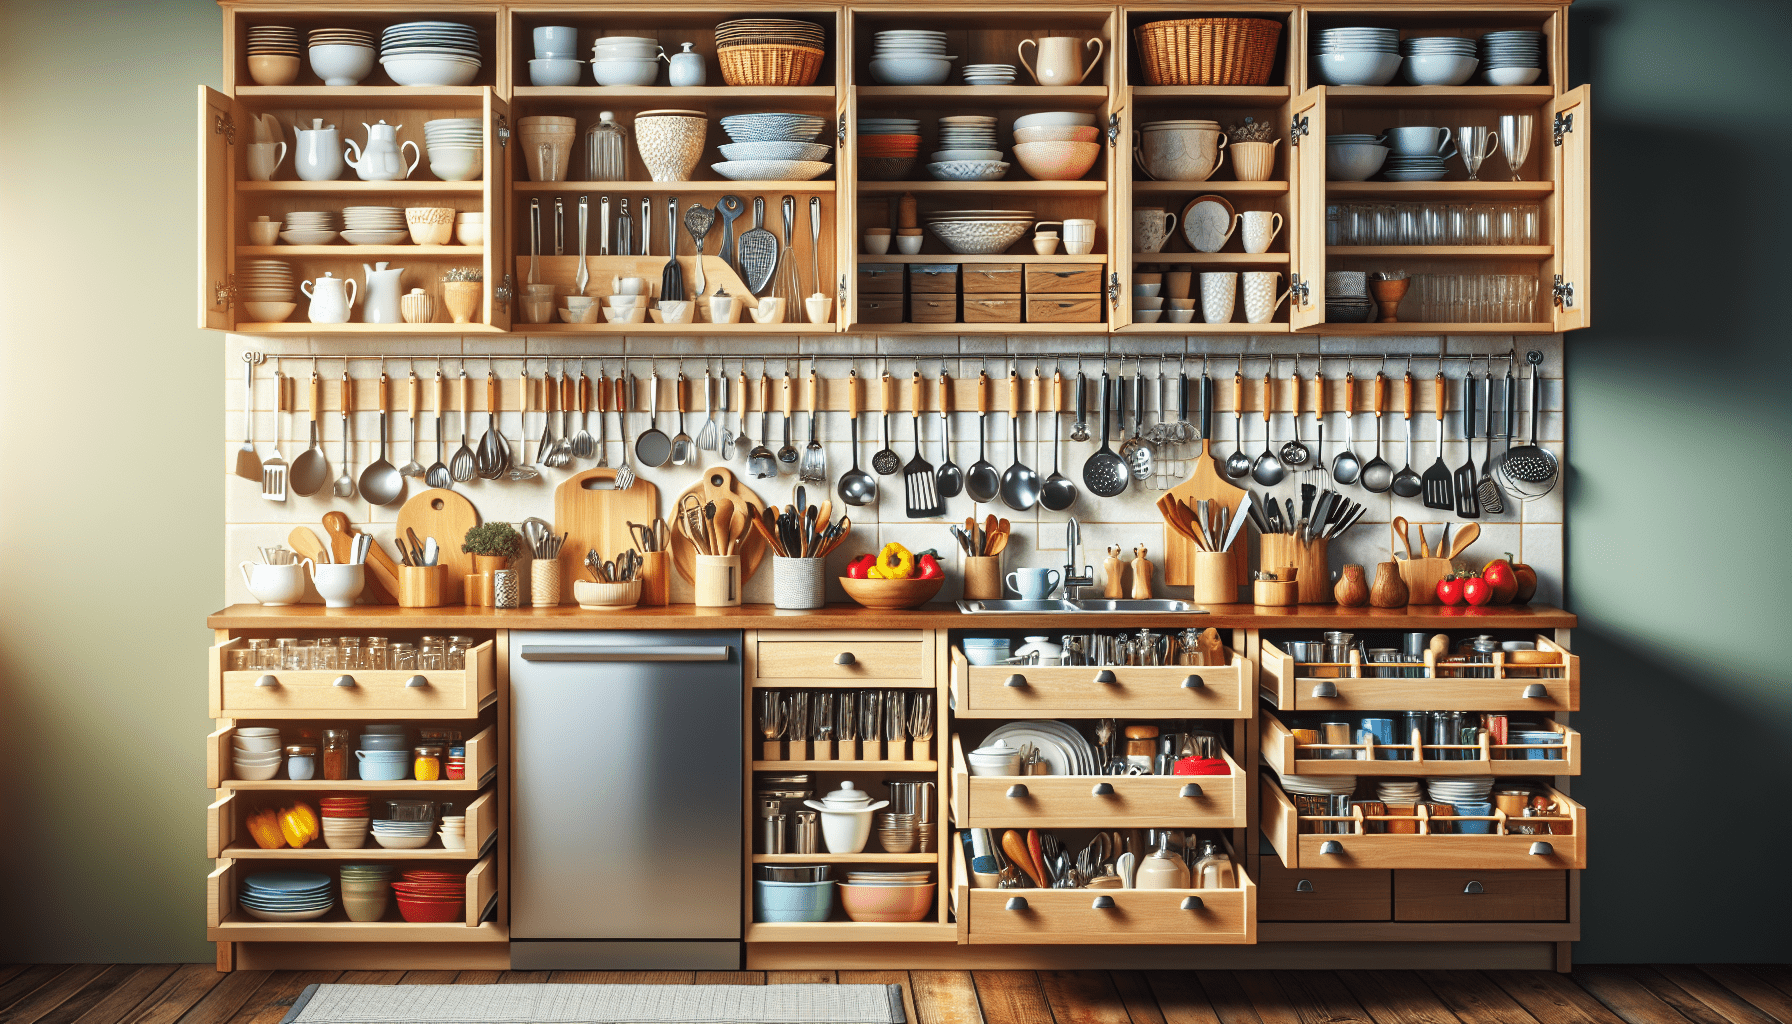 What Is The Most Efficient Way To Organize A Kitchen?